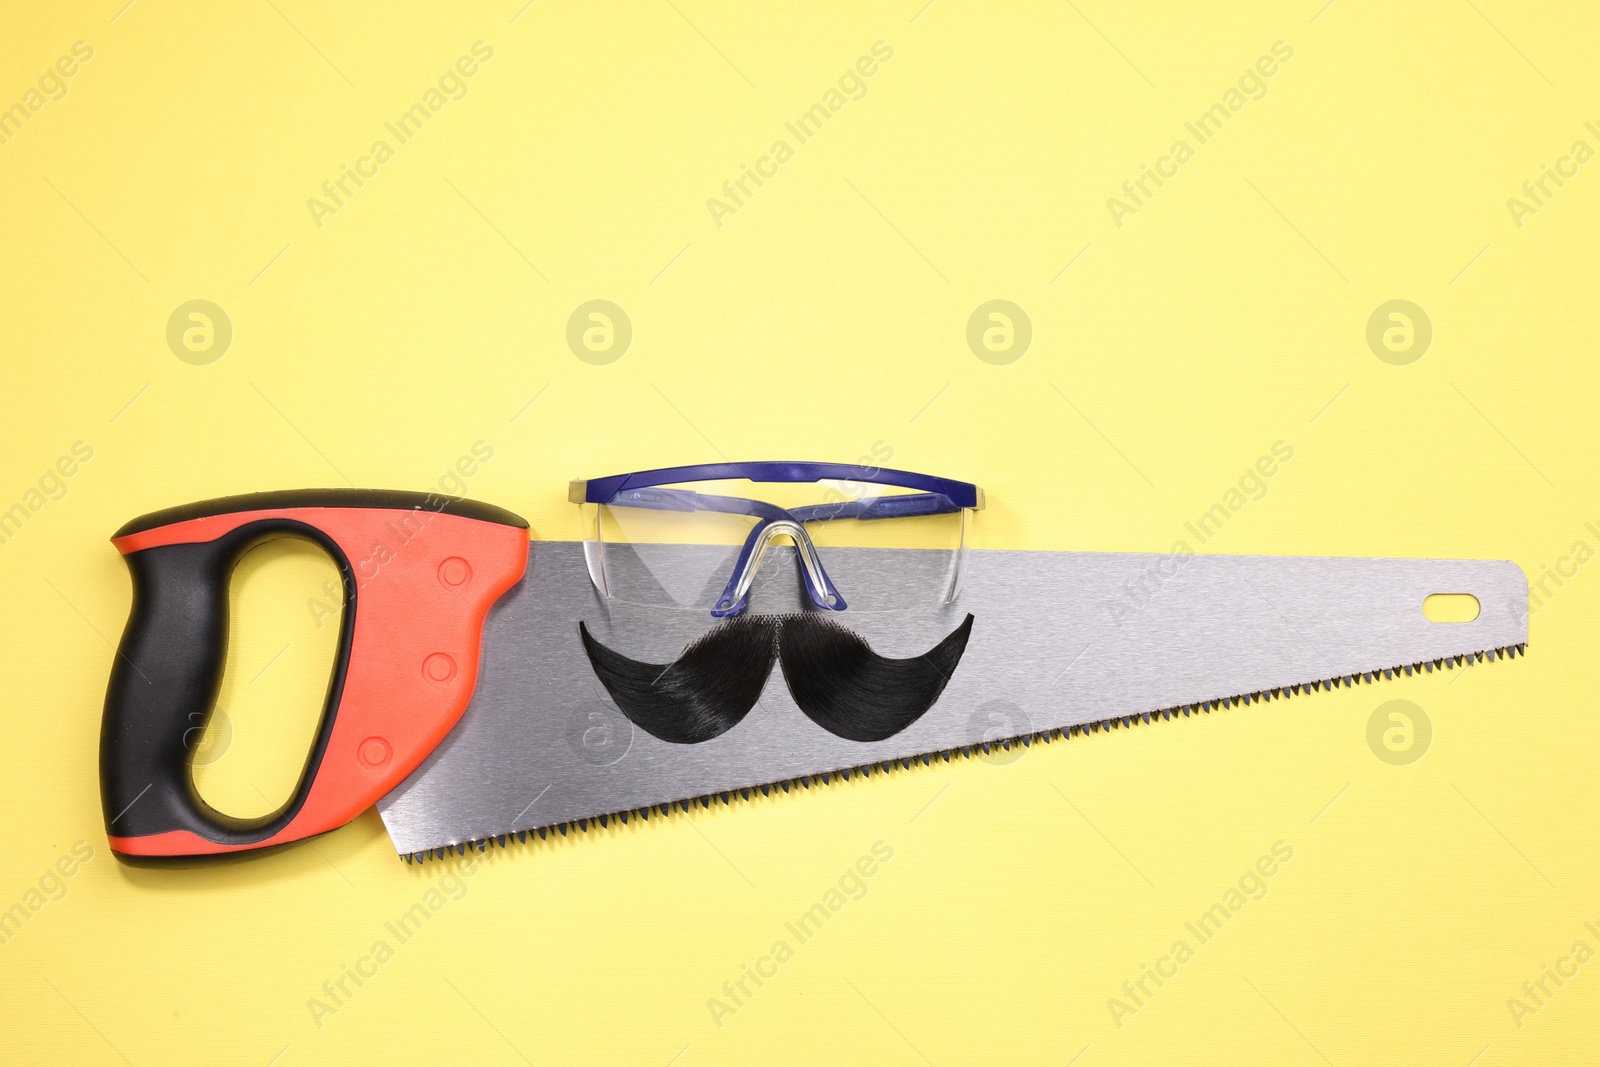 Photo of Man's face made of artificial mustache, safety glasses and hand saw on yellow background, top view